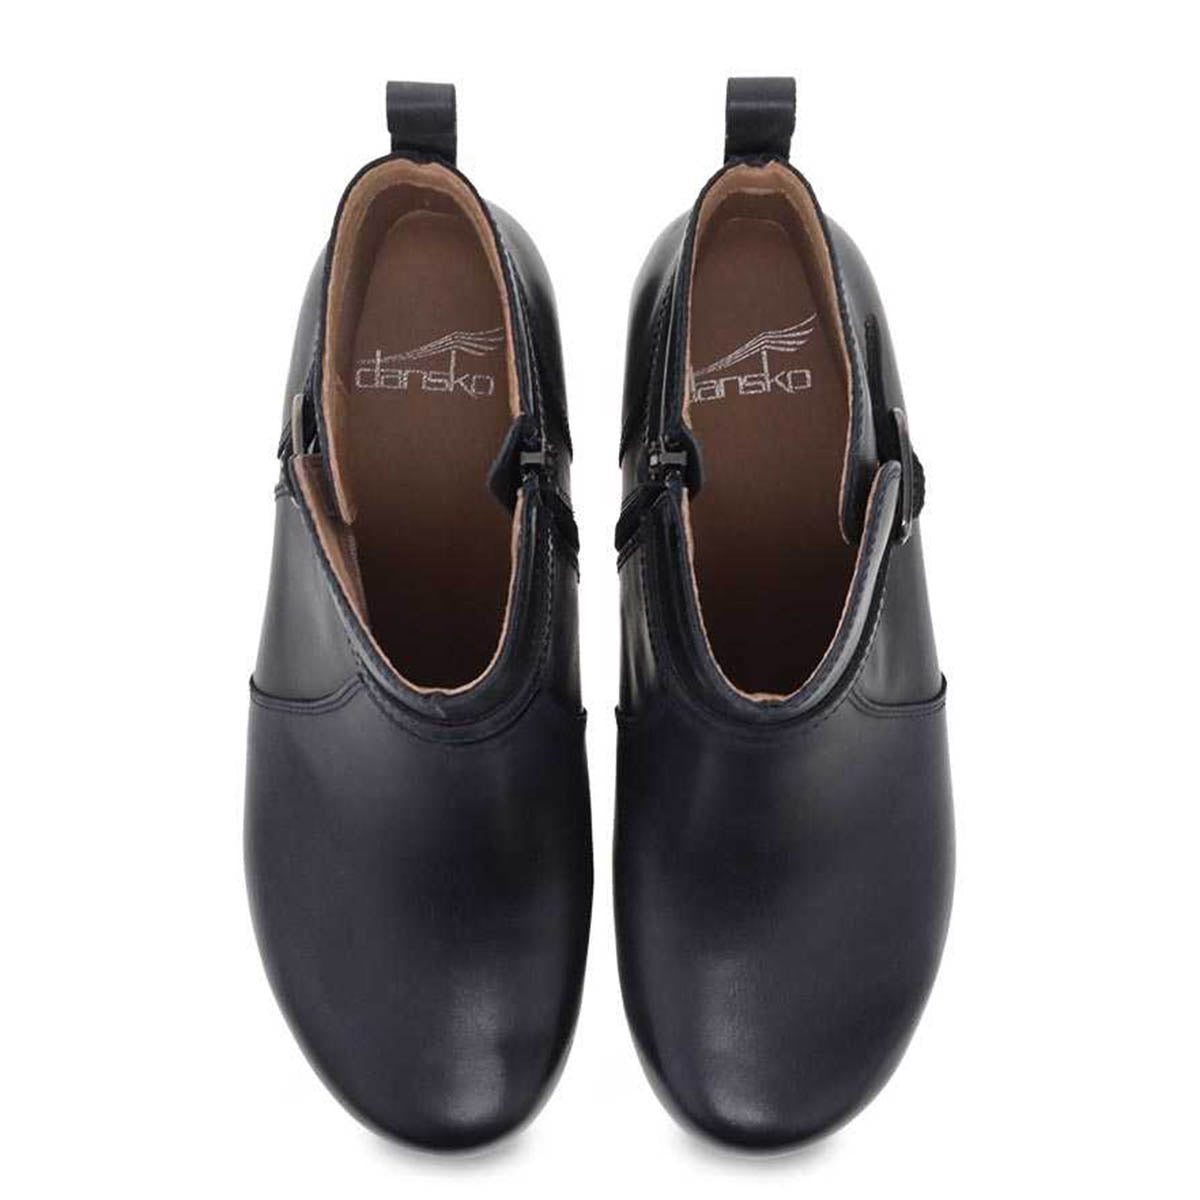 A pair of black leather slip-on shoes featuring Dansko Natural Arch technology, with a Dansko brand label on the insole, presented in a top-down view.